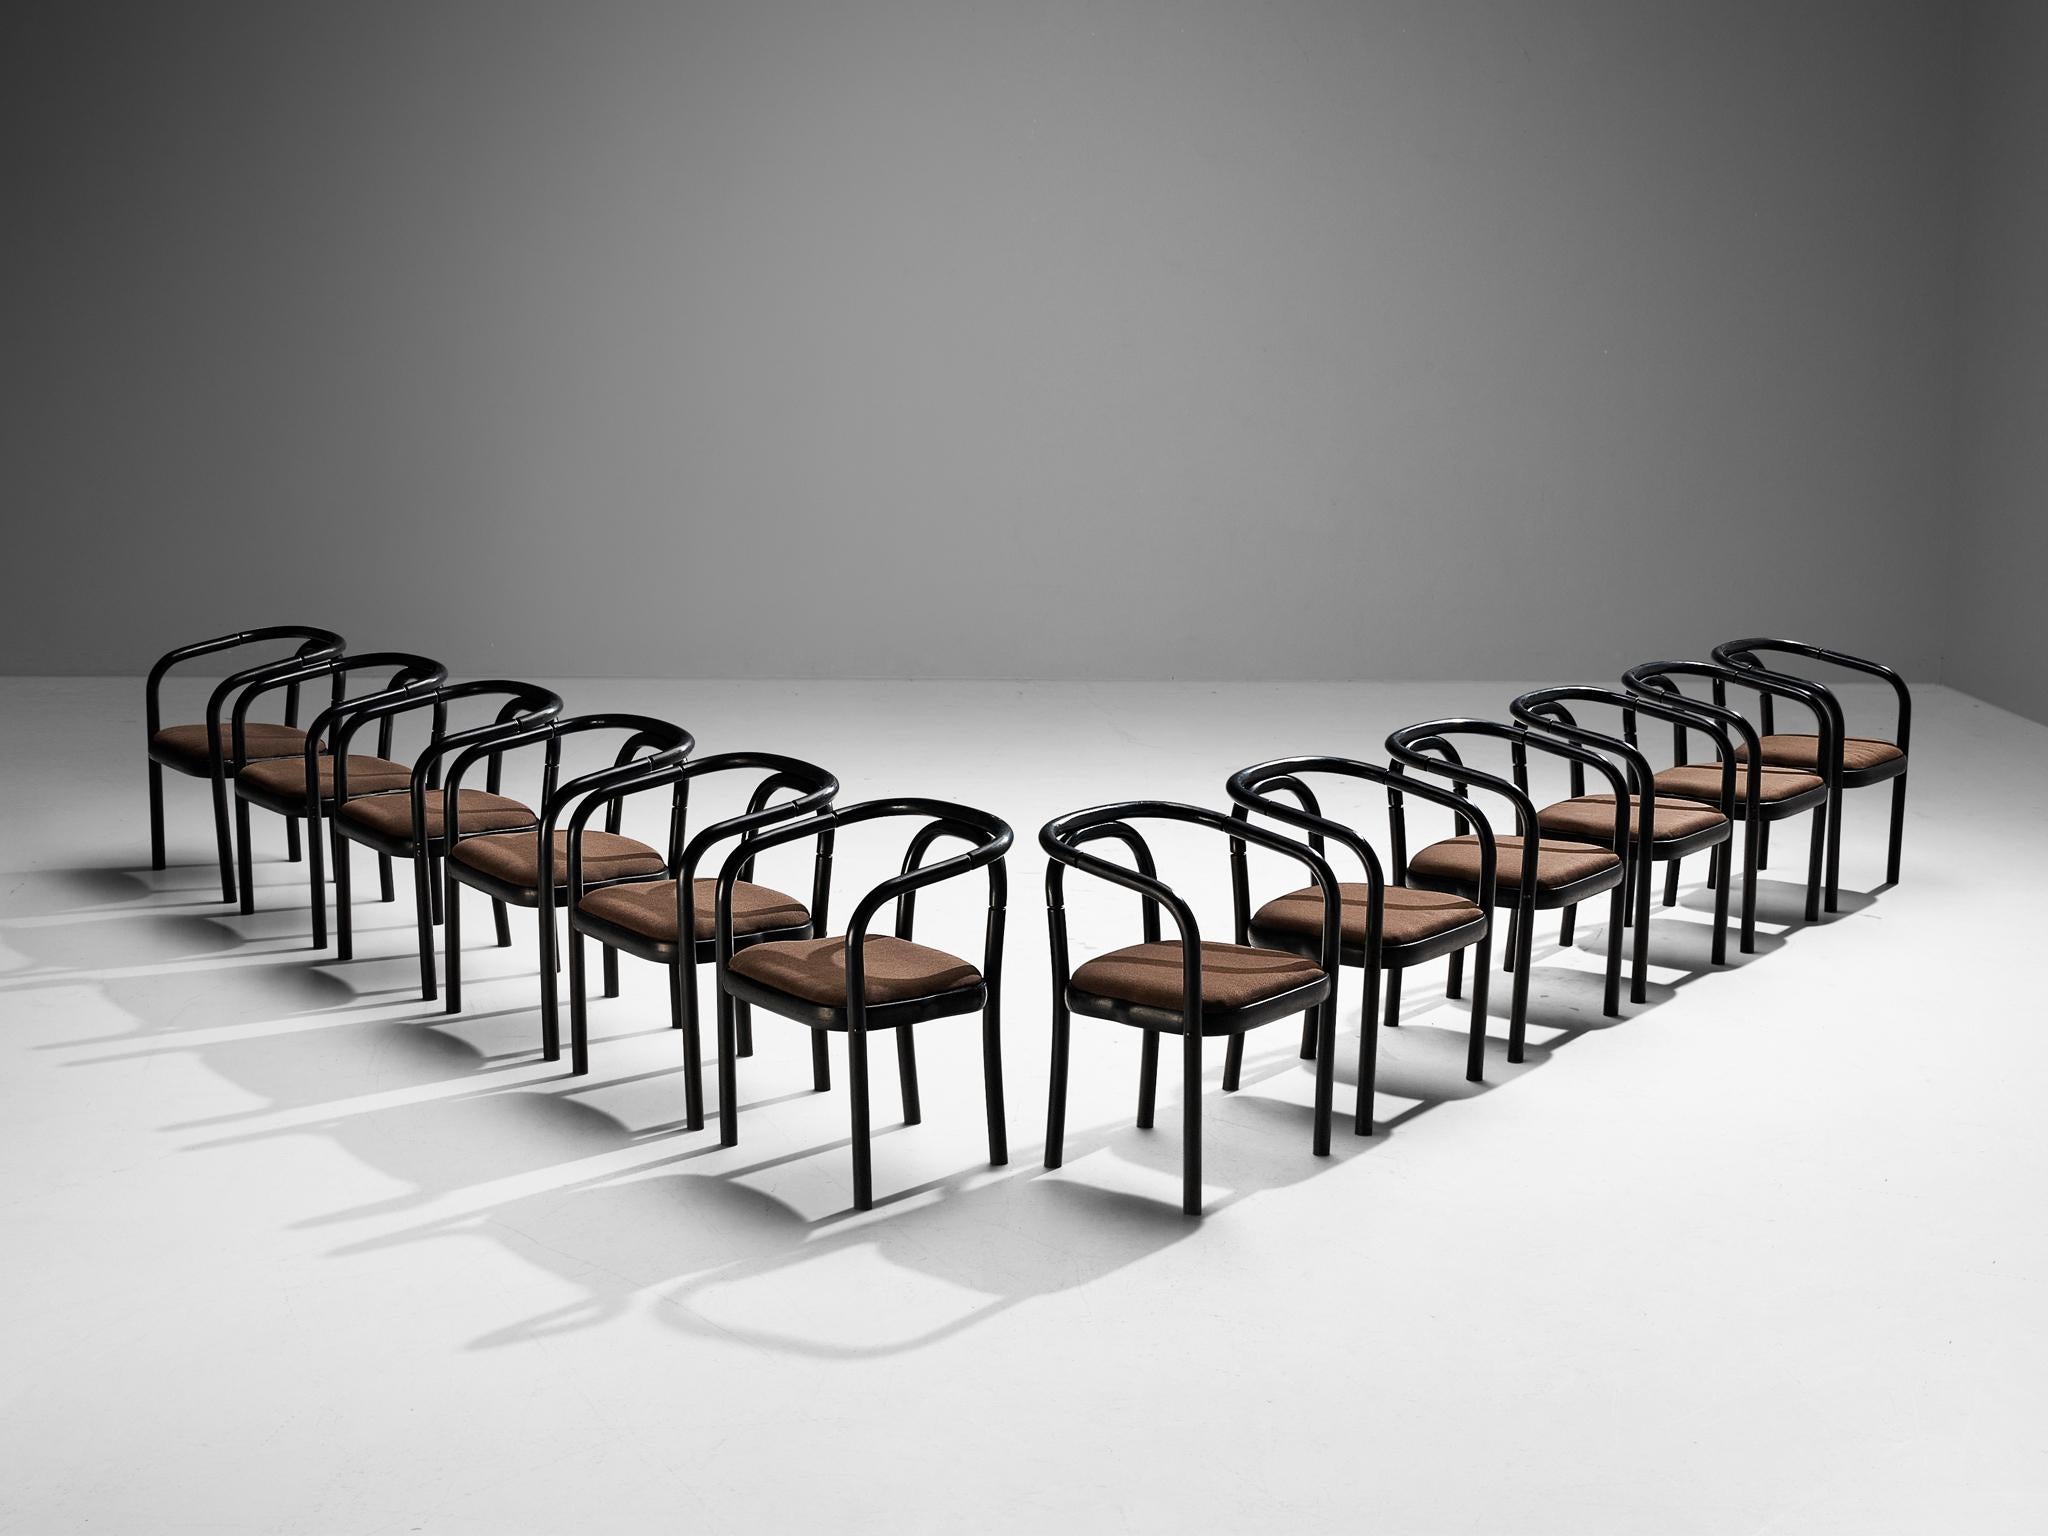 Antonin Suman for TON, set of twelve armchairs, model E4309, lacquered wood, fabric, Czech Republic, 1977

A set of twelve dining chairs that were designed by Antonin Suman and manufactured by TON. These chairs feature a wonderful bentwood frame